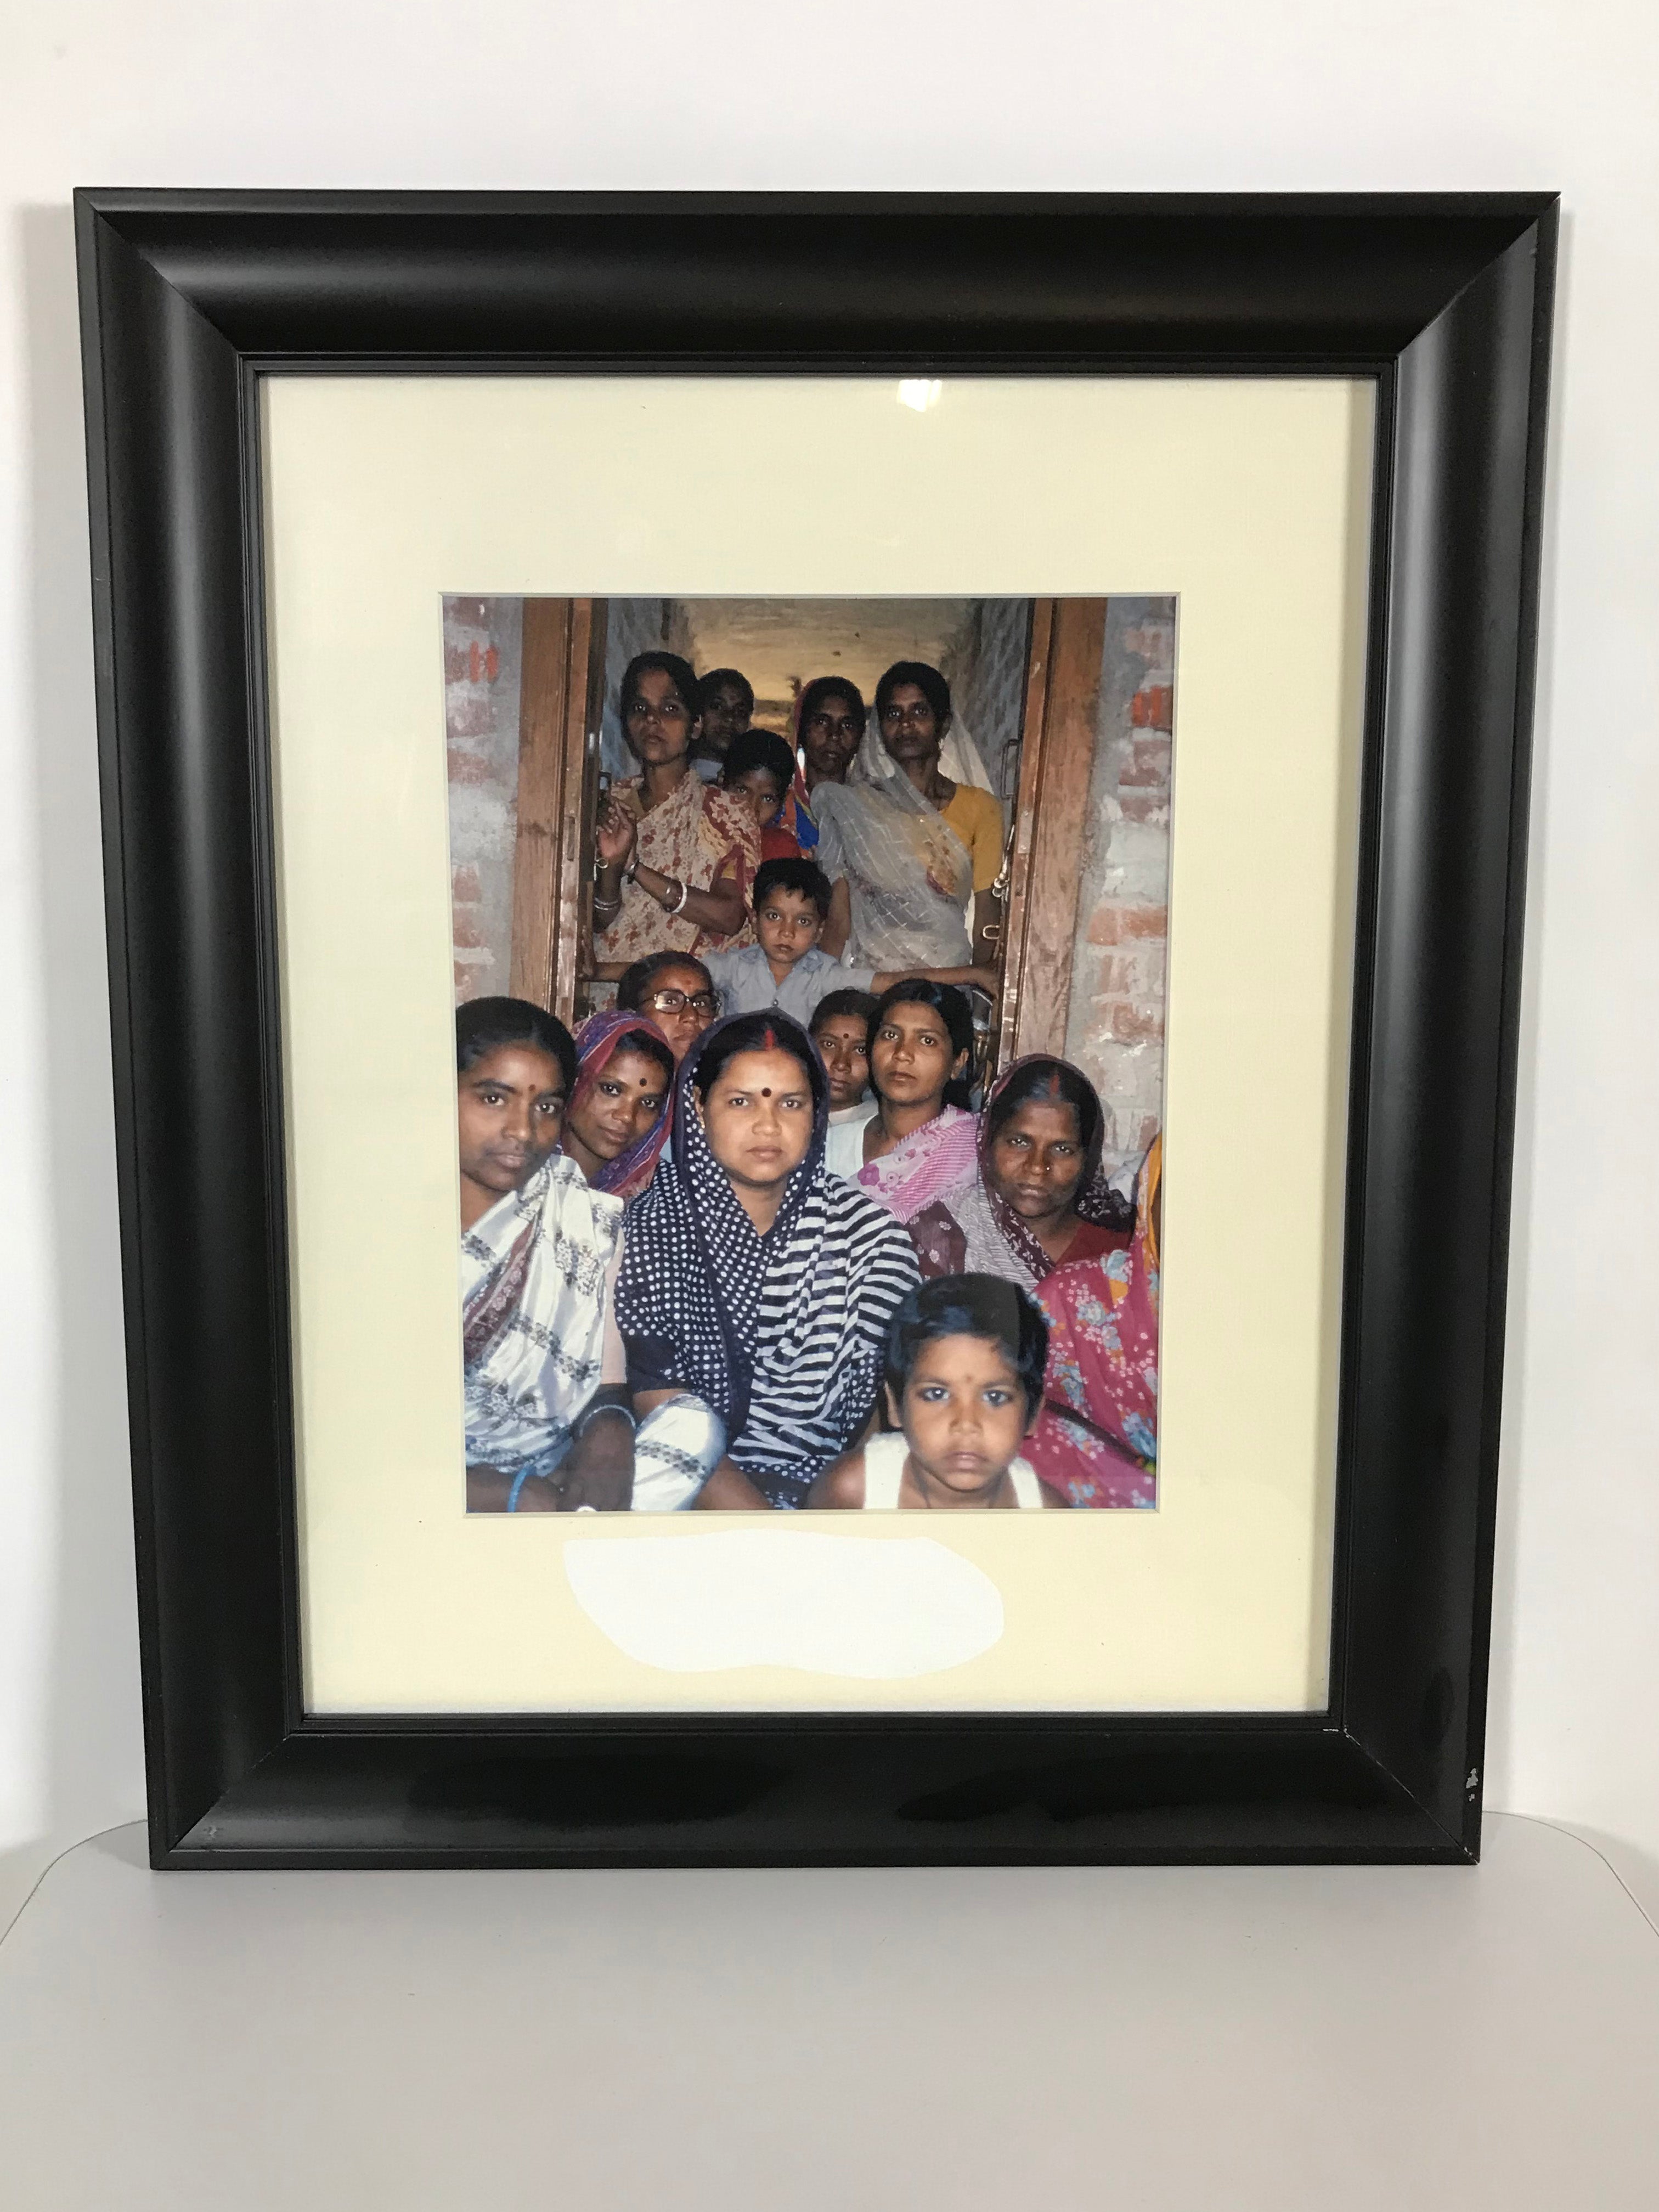 20x24 Framed Picture of People in Rural India